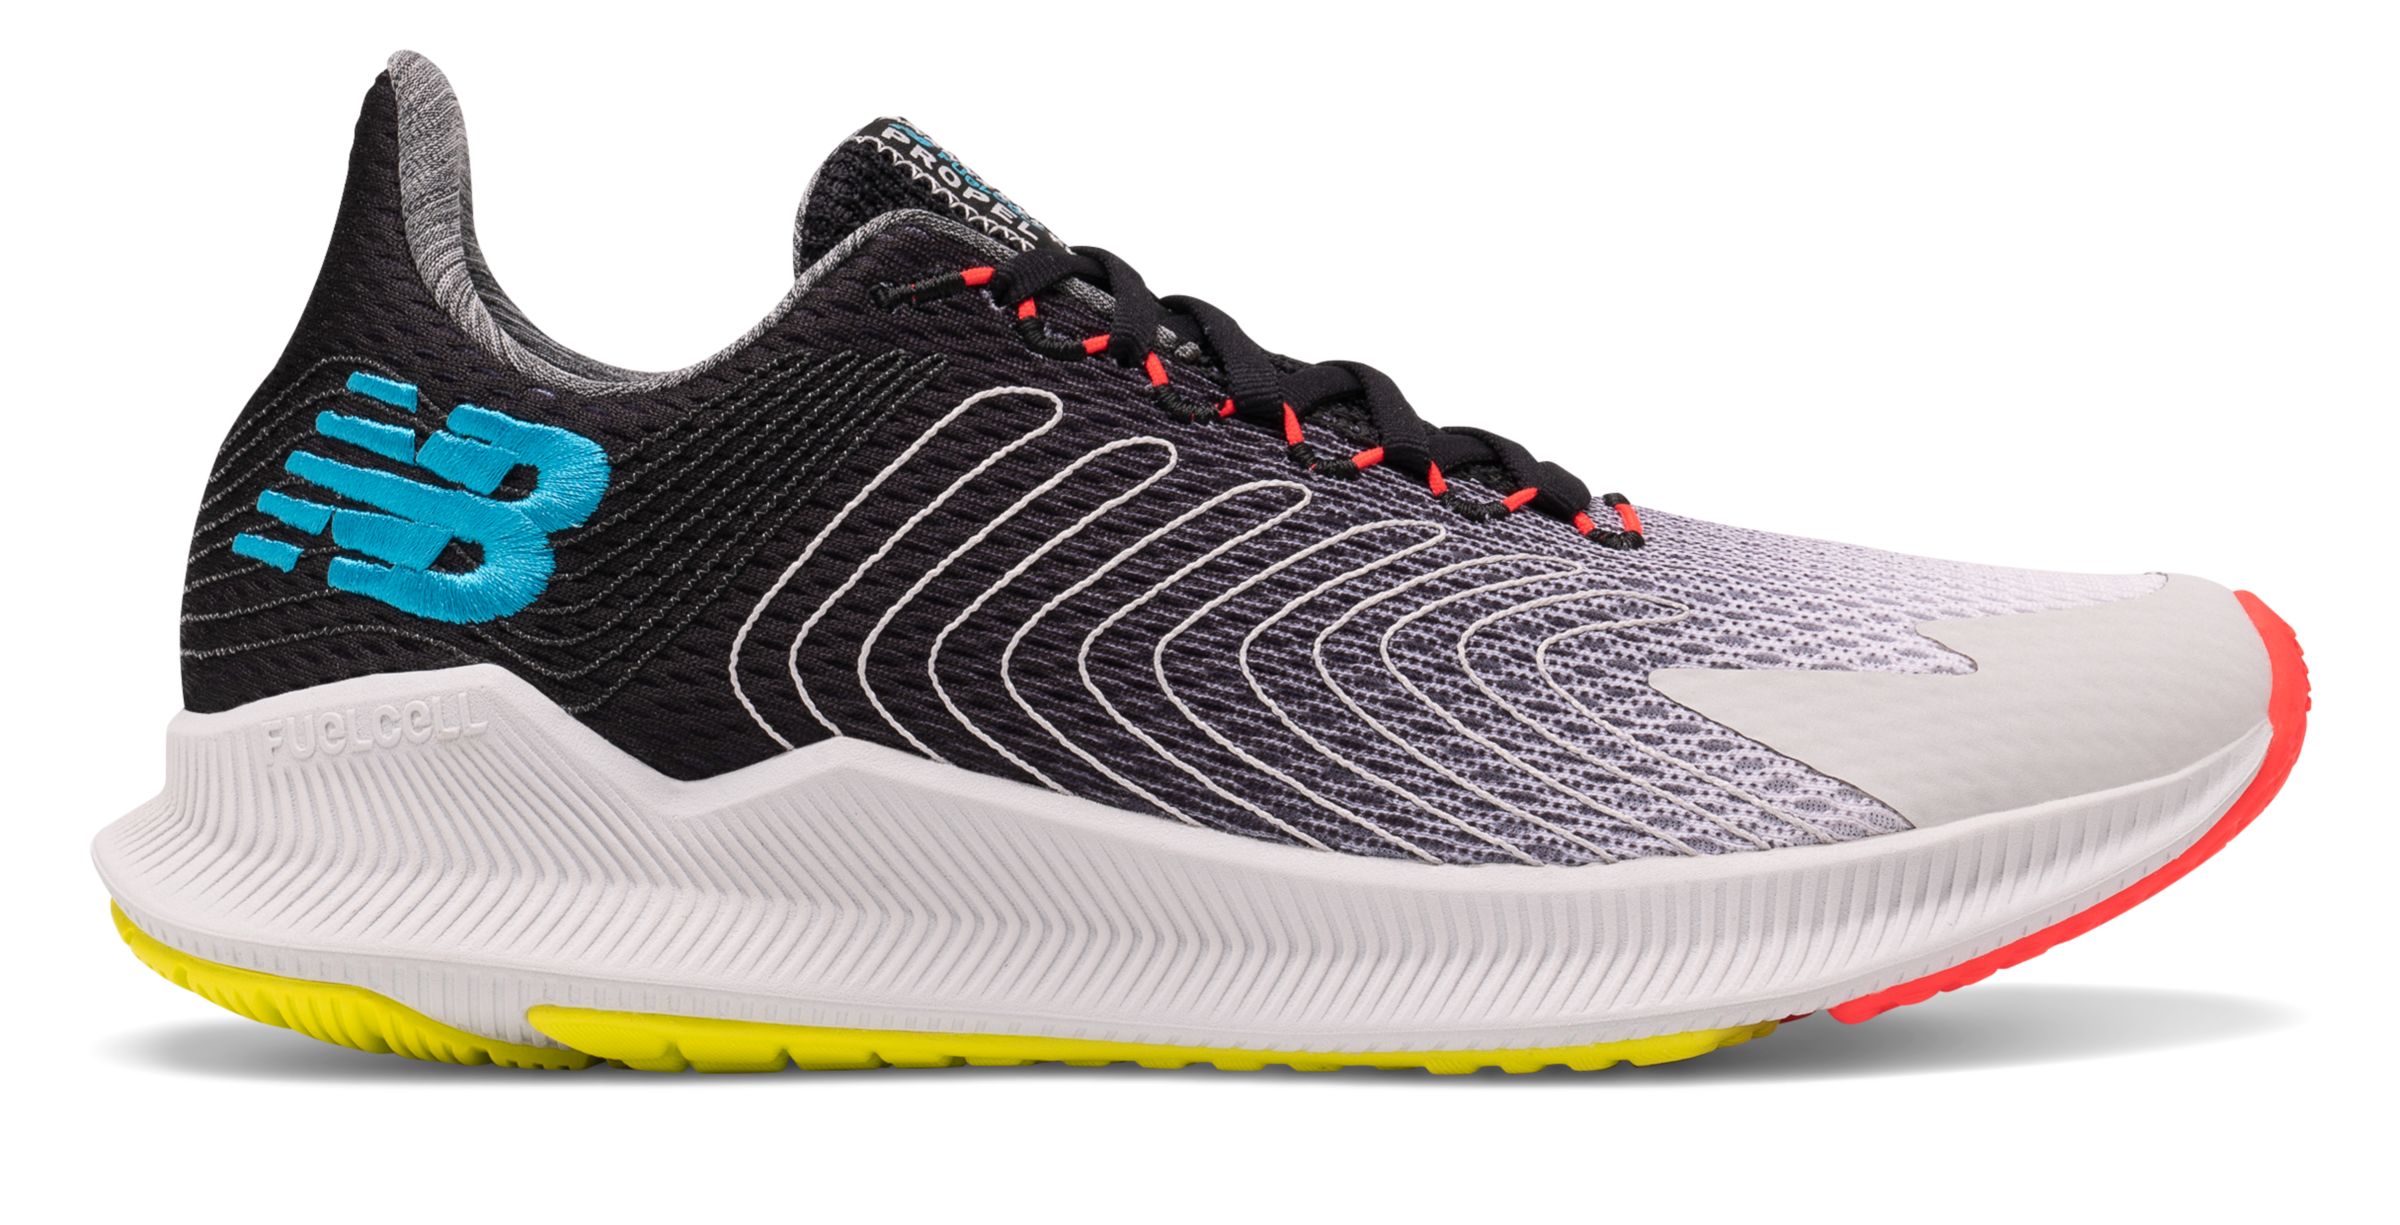  *Markdown*  Men's FuelCell Propel